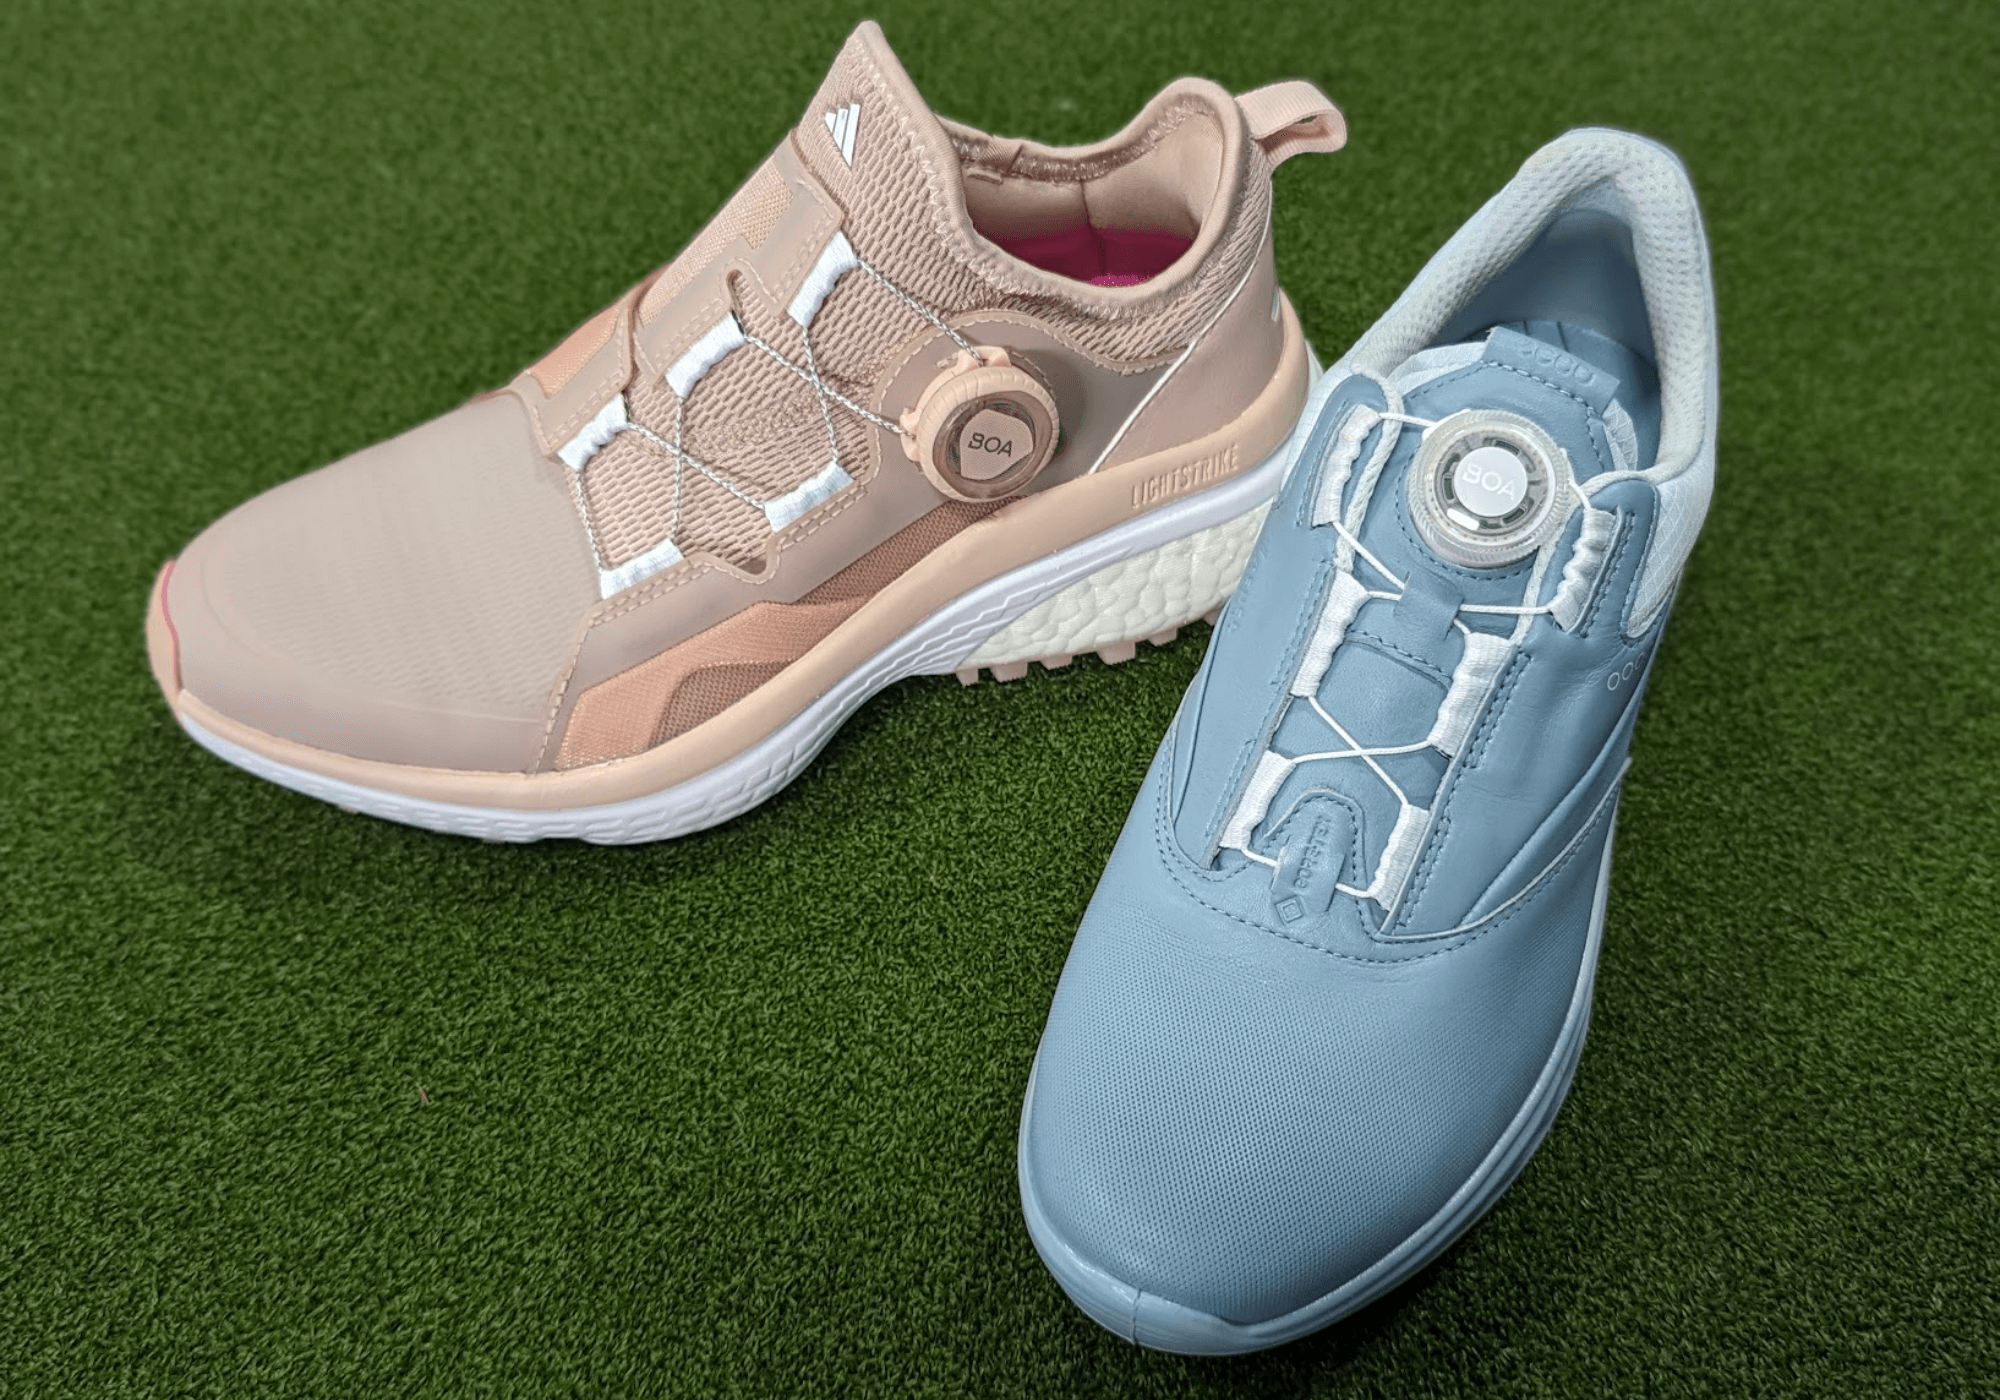 BOA is a trend in women's spikeless golf shoes and offers a nice lacing solution. 